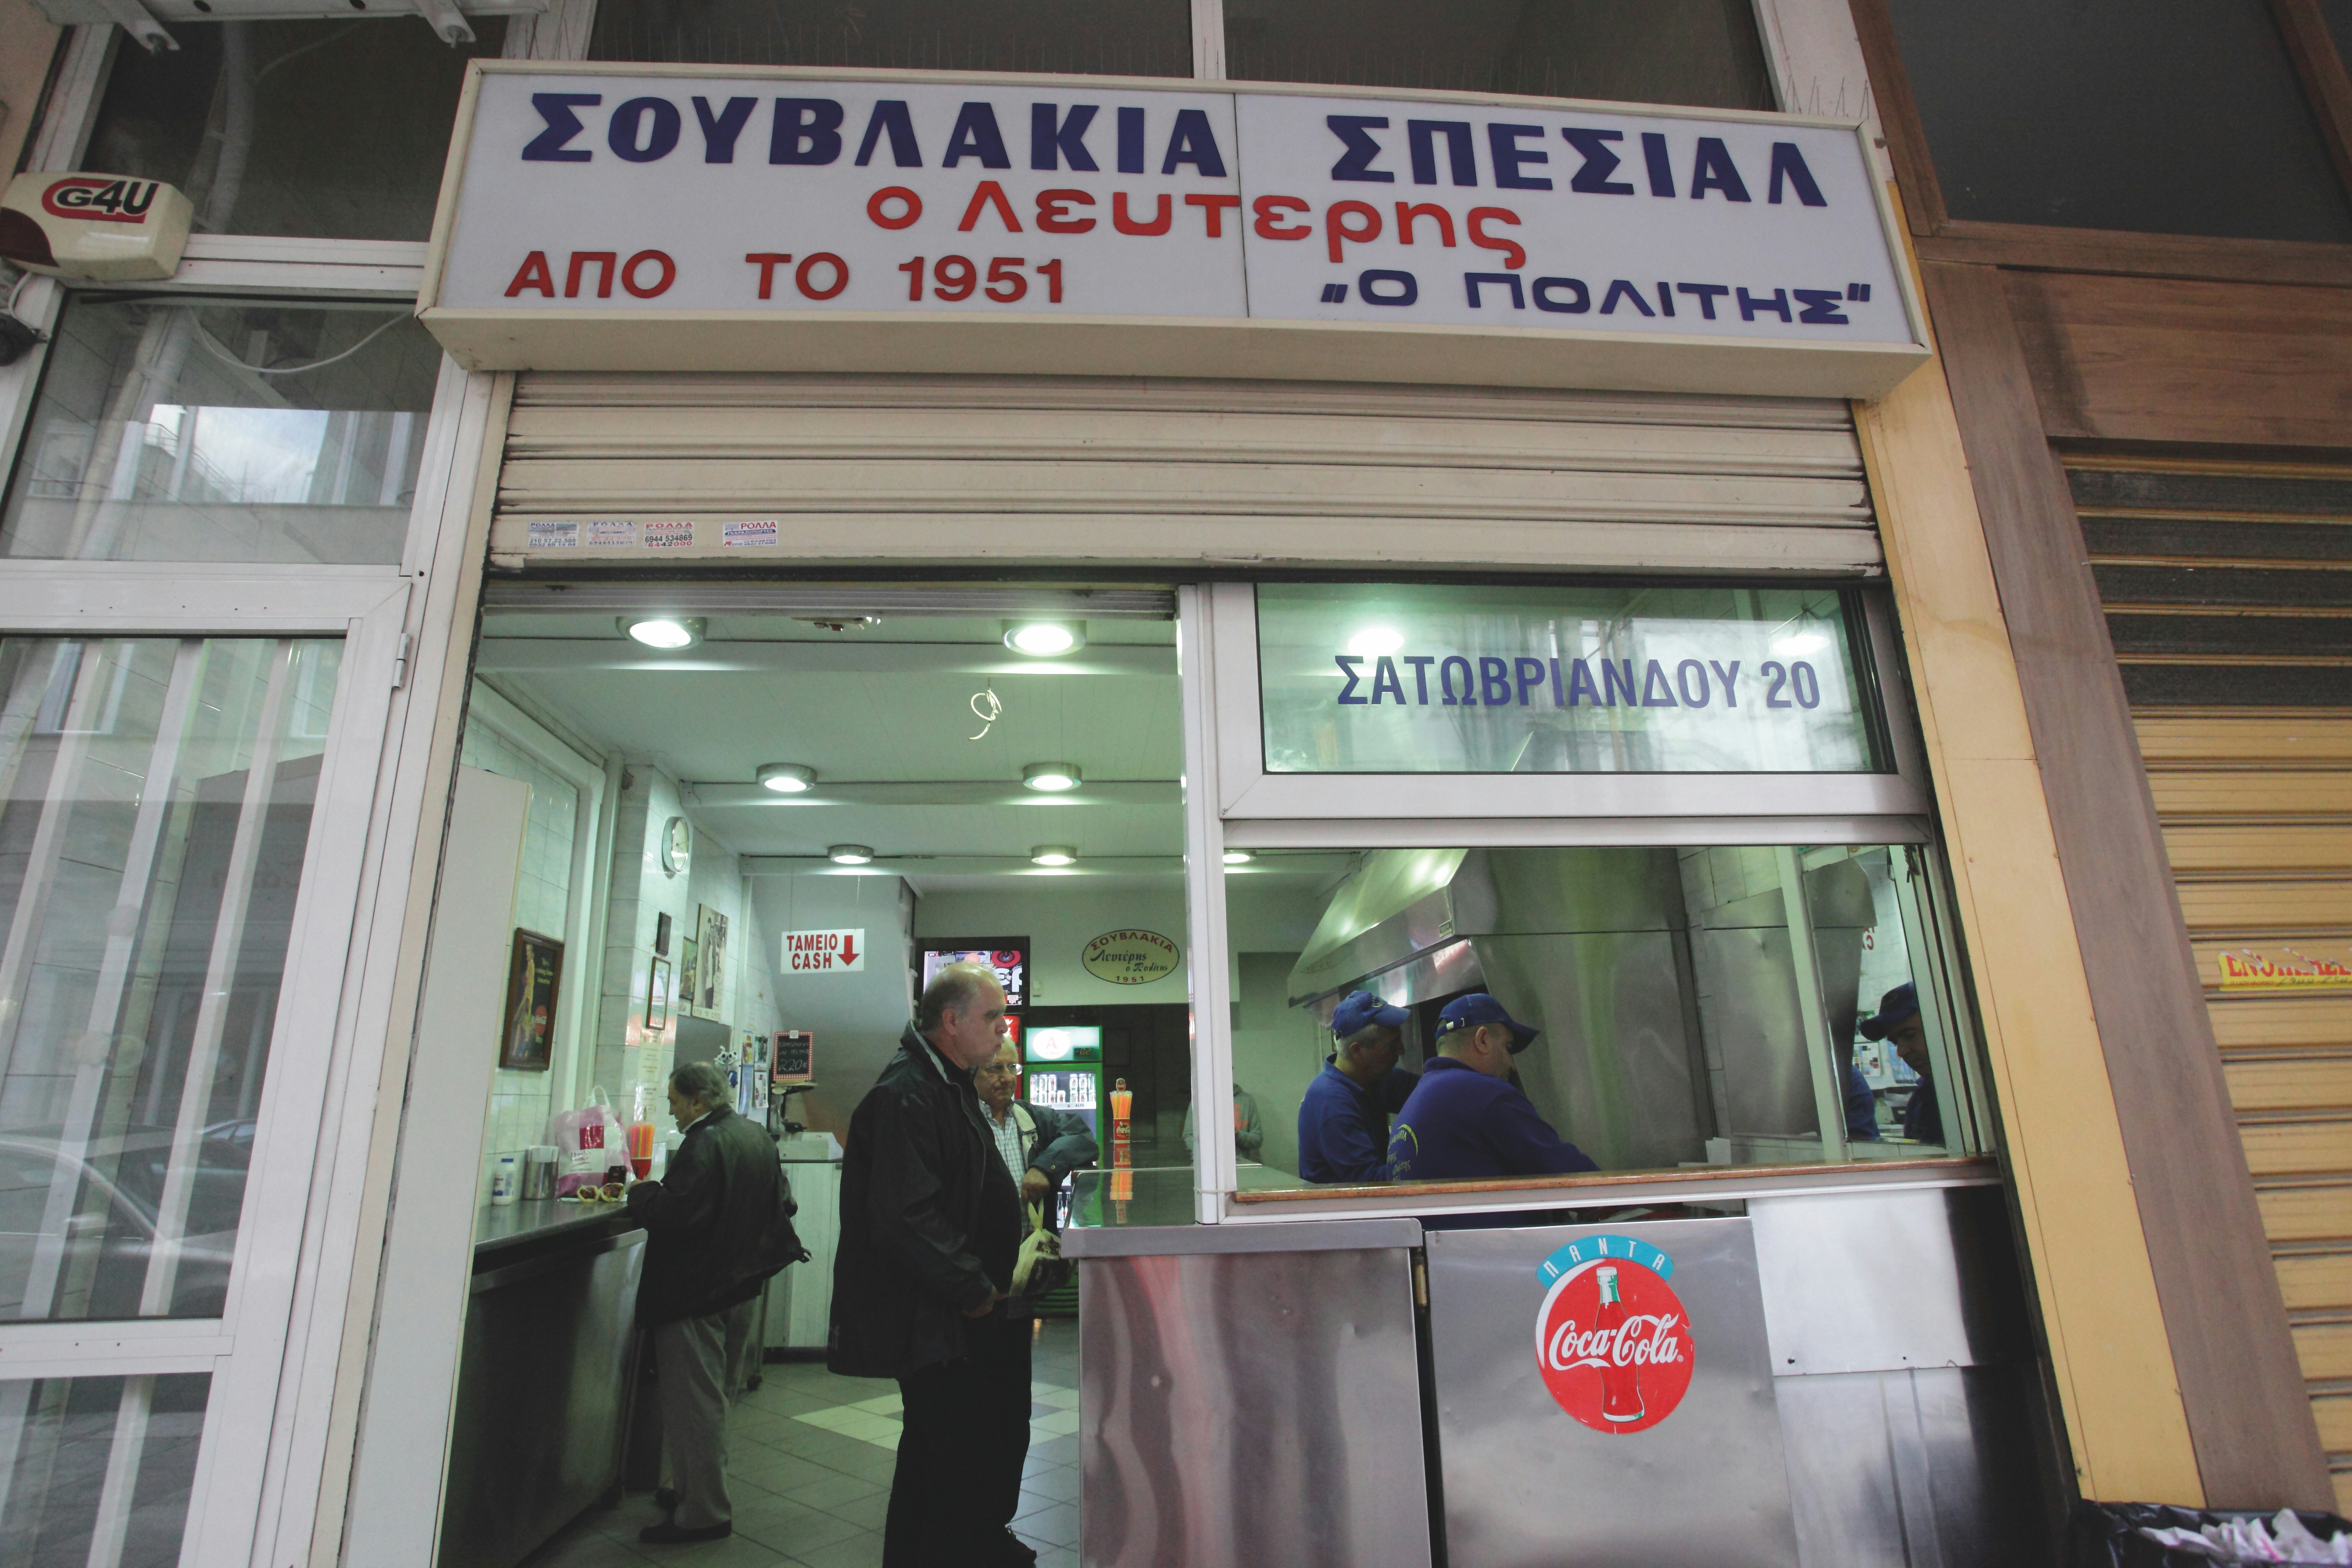 An older gentleman in black pants and a black coat waits at the counter of the Lefteris suvlaki stand in Athens, Greece while two employees in blue shirts prepare food in a stainless steel kitchenette 